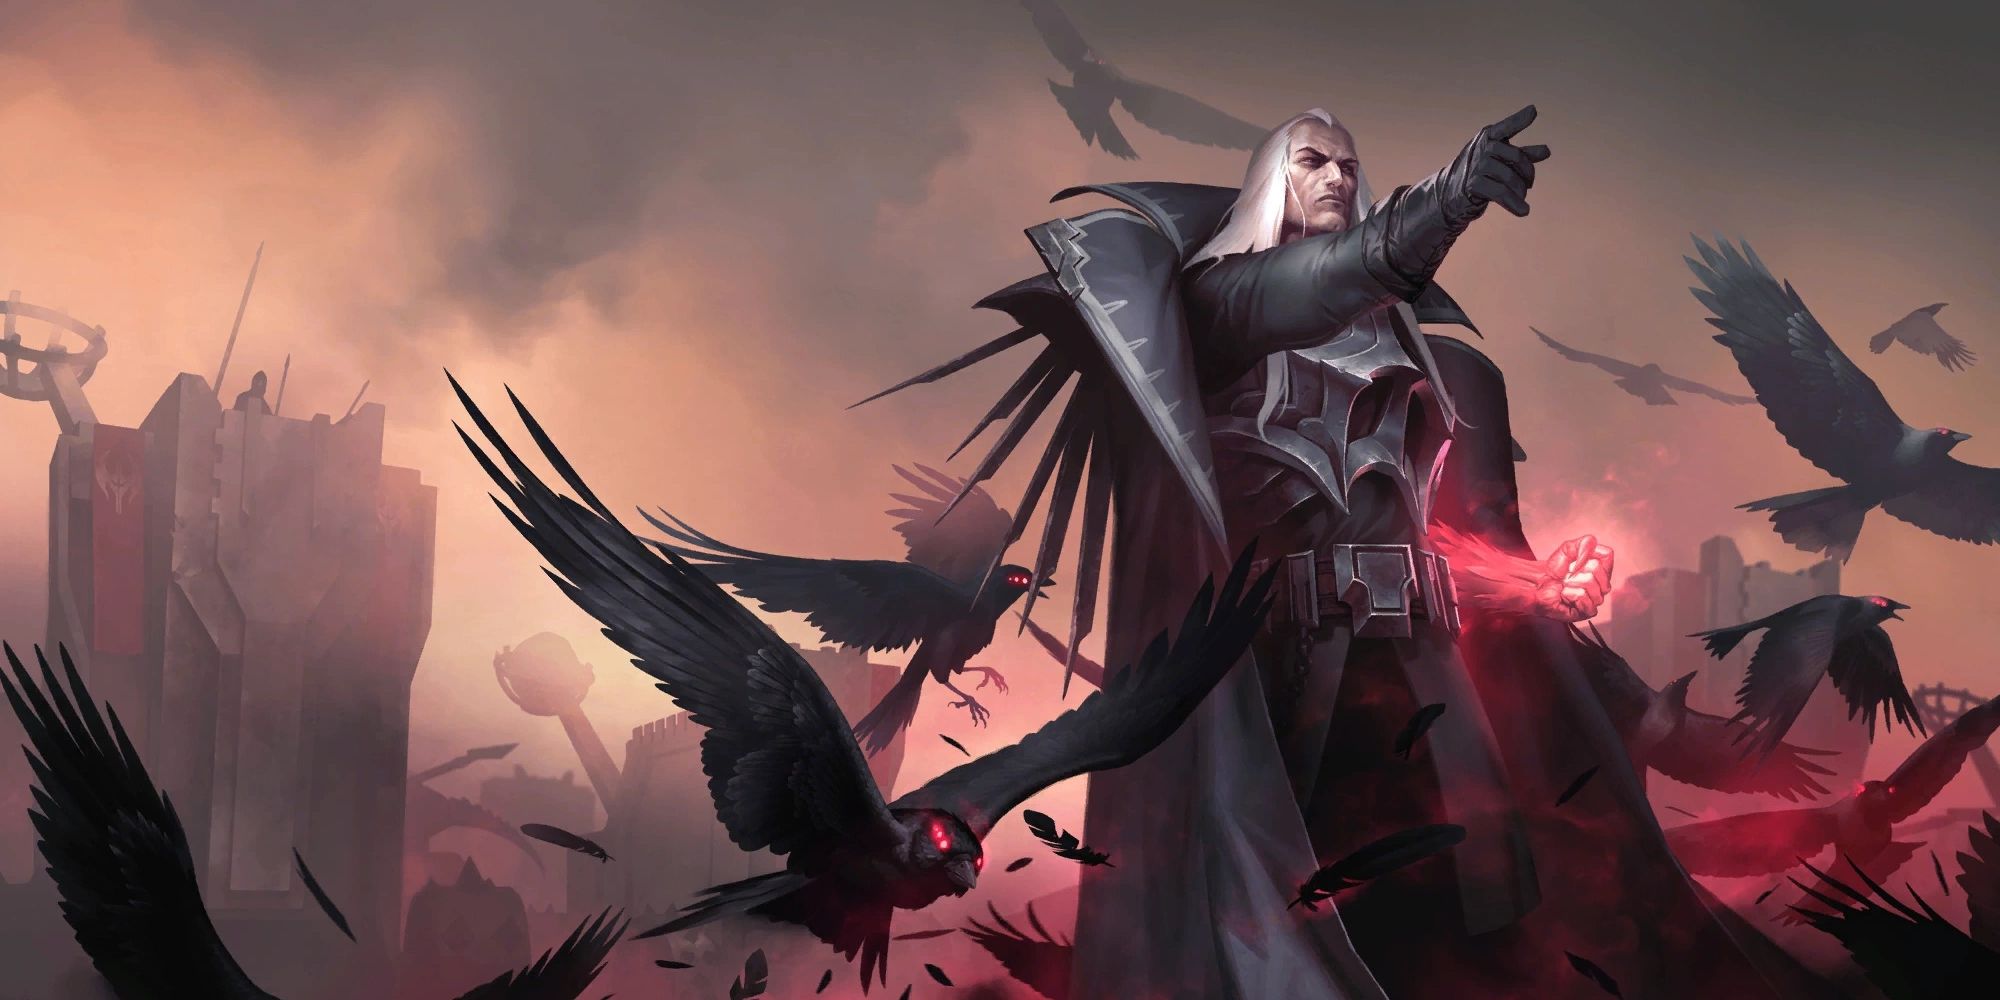 Promotional art of Swain and his demonic crows